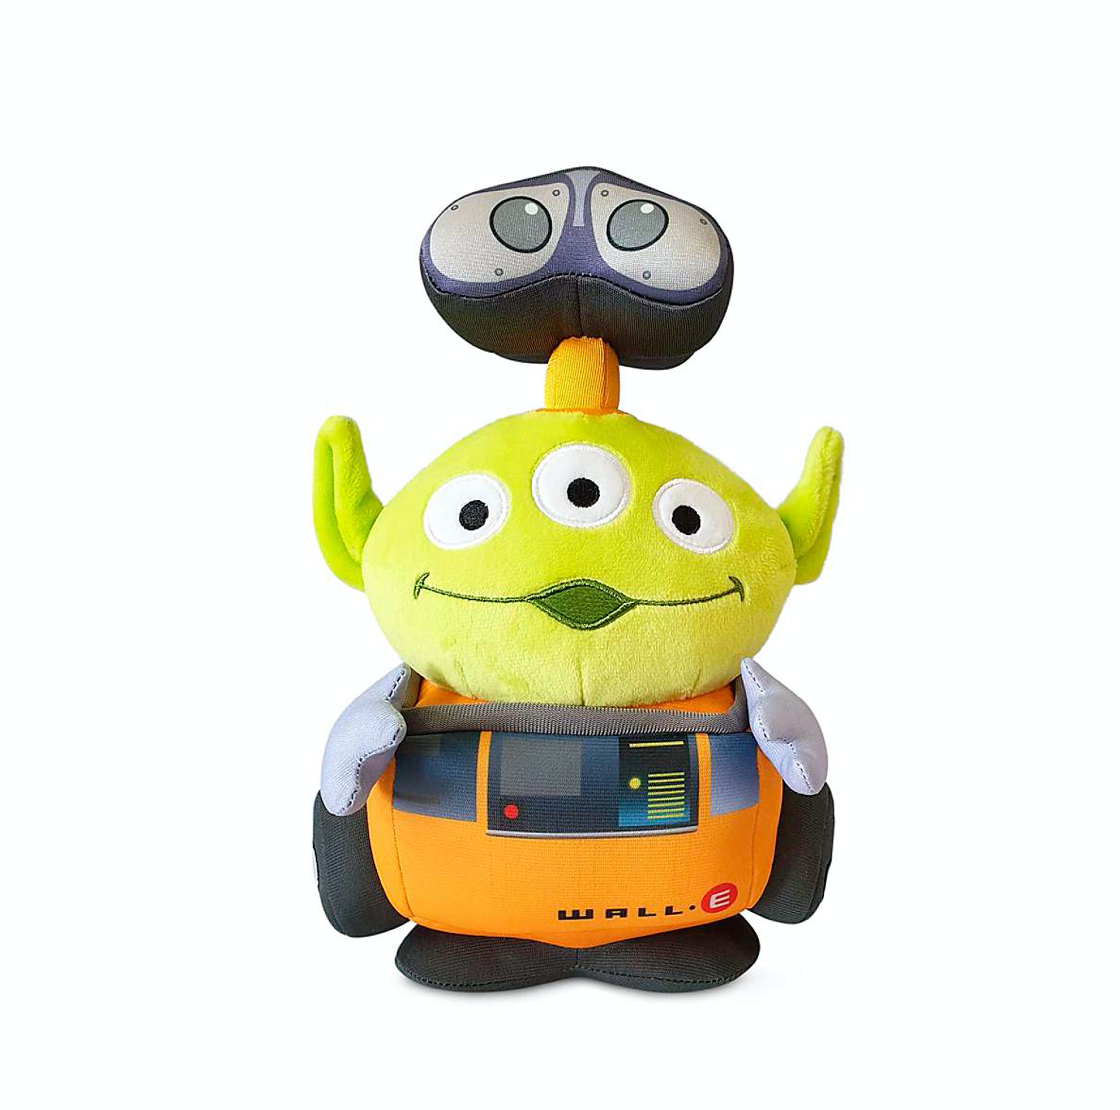 Disney Toy Story Alien Pixar Remix Plush Wall-E Limited New with Tag